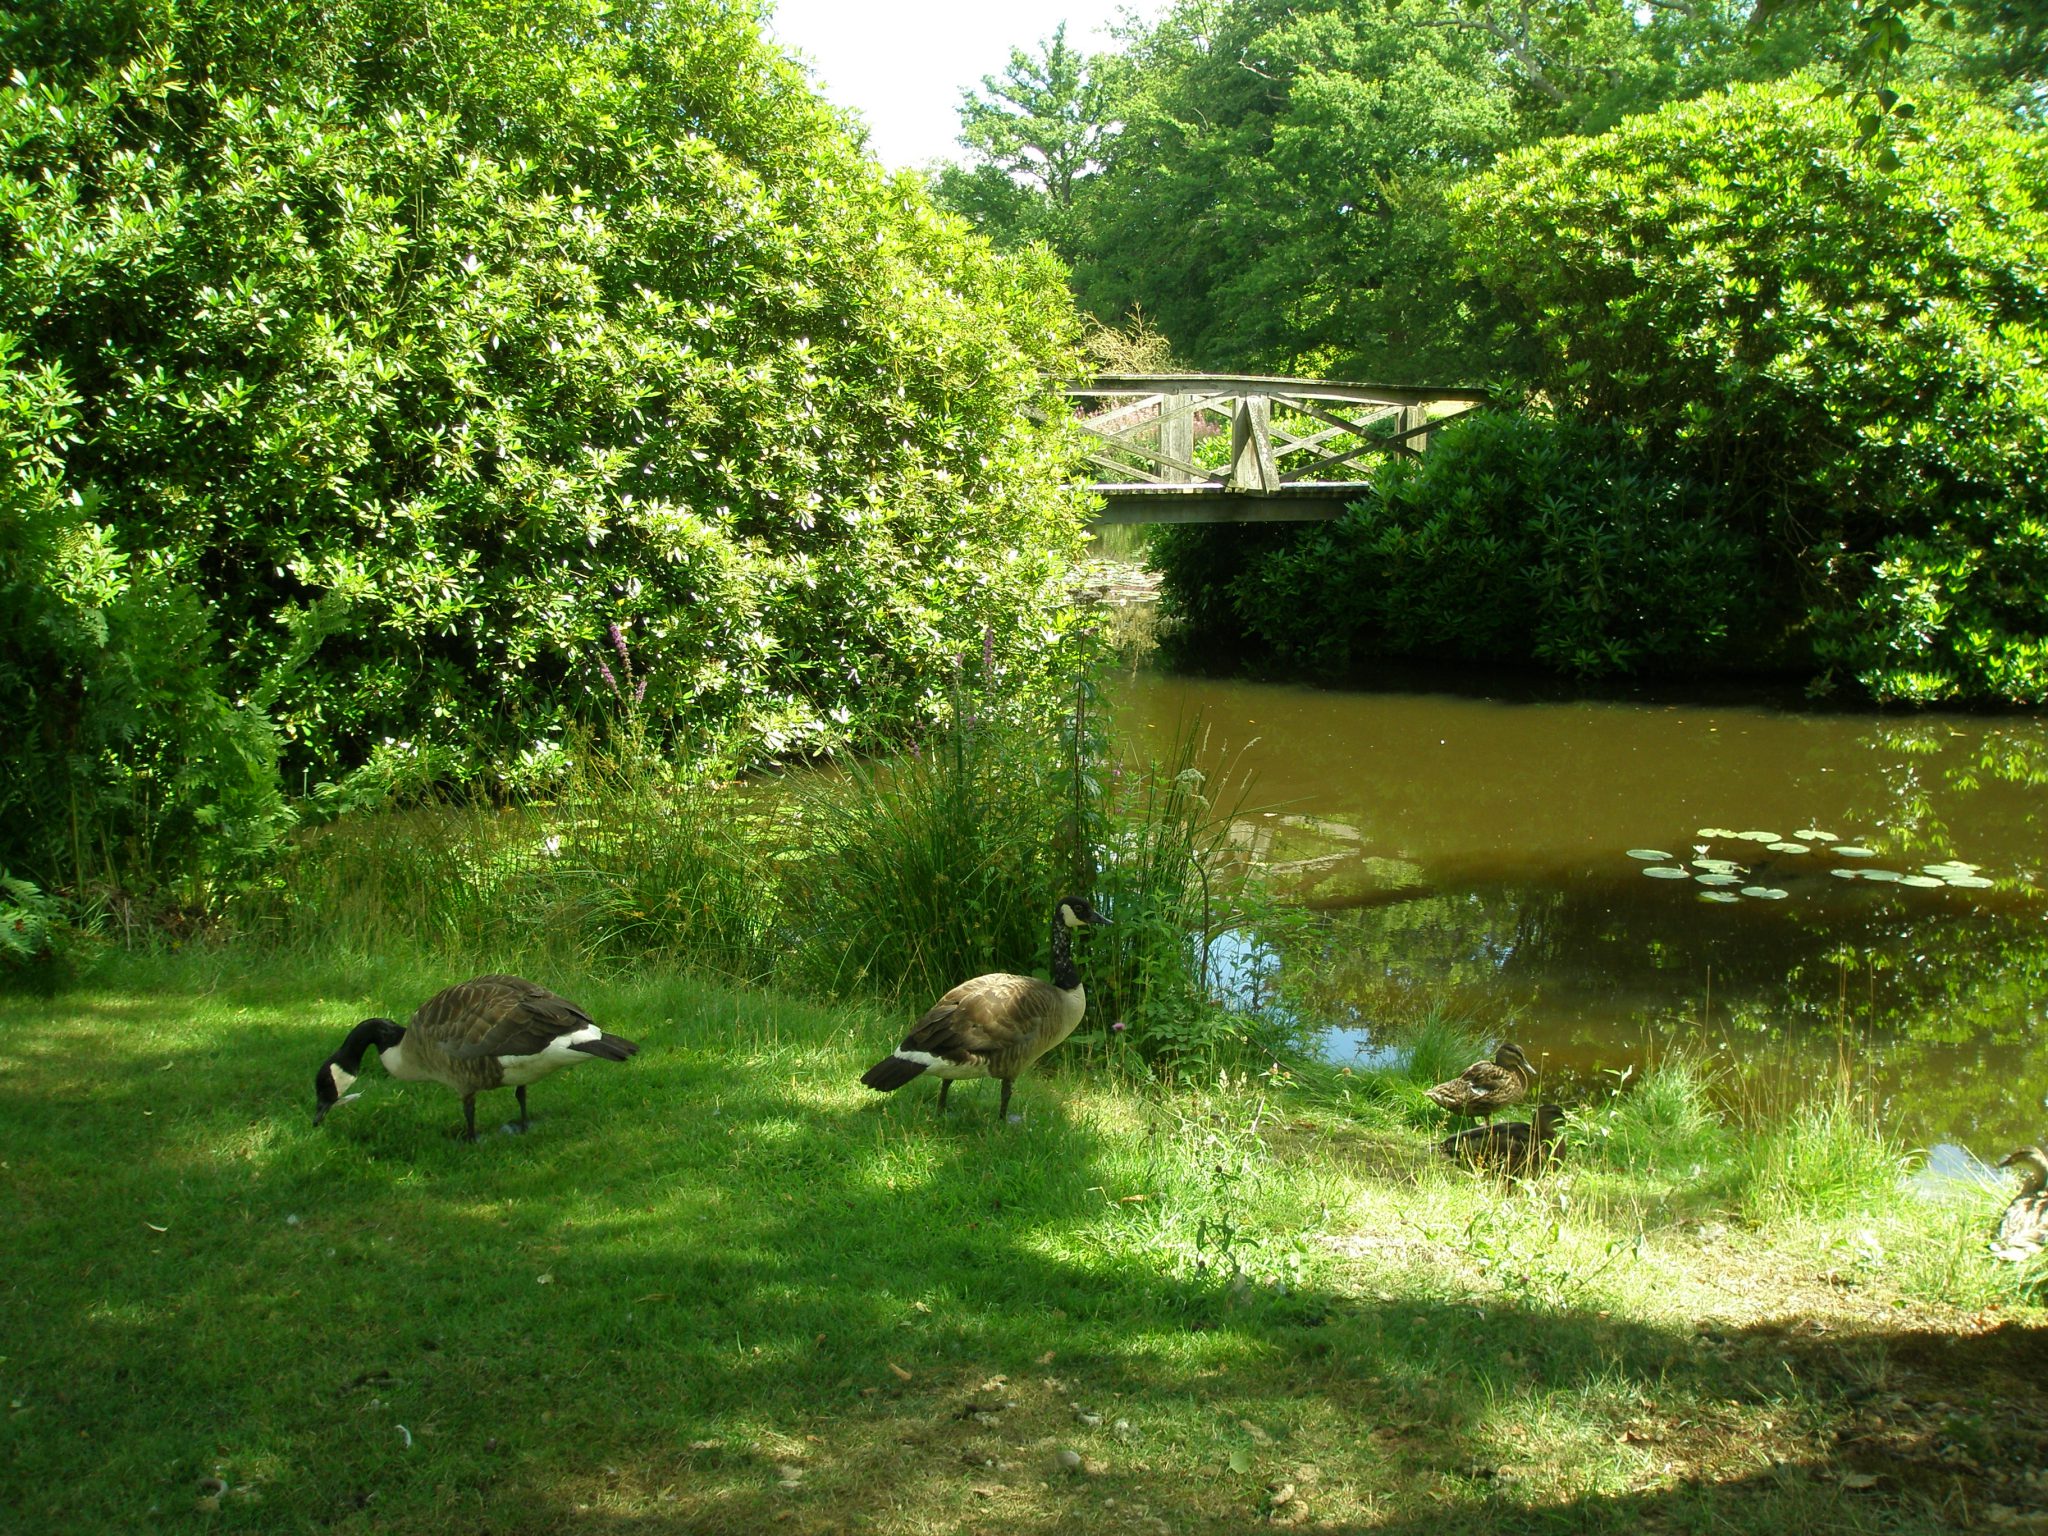 Geese on the Isthmus, with rustic Chinese Bridge.